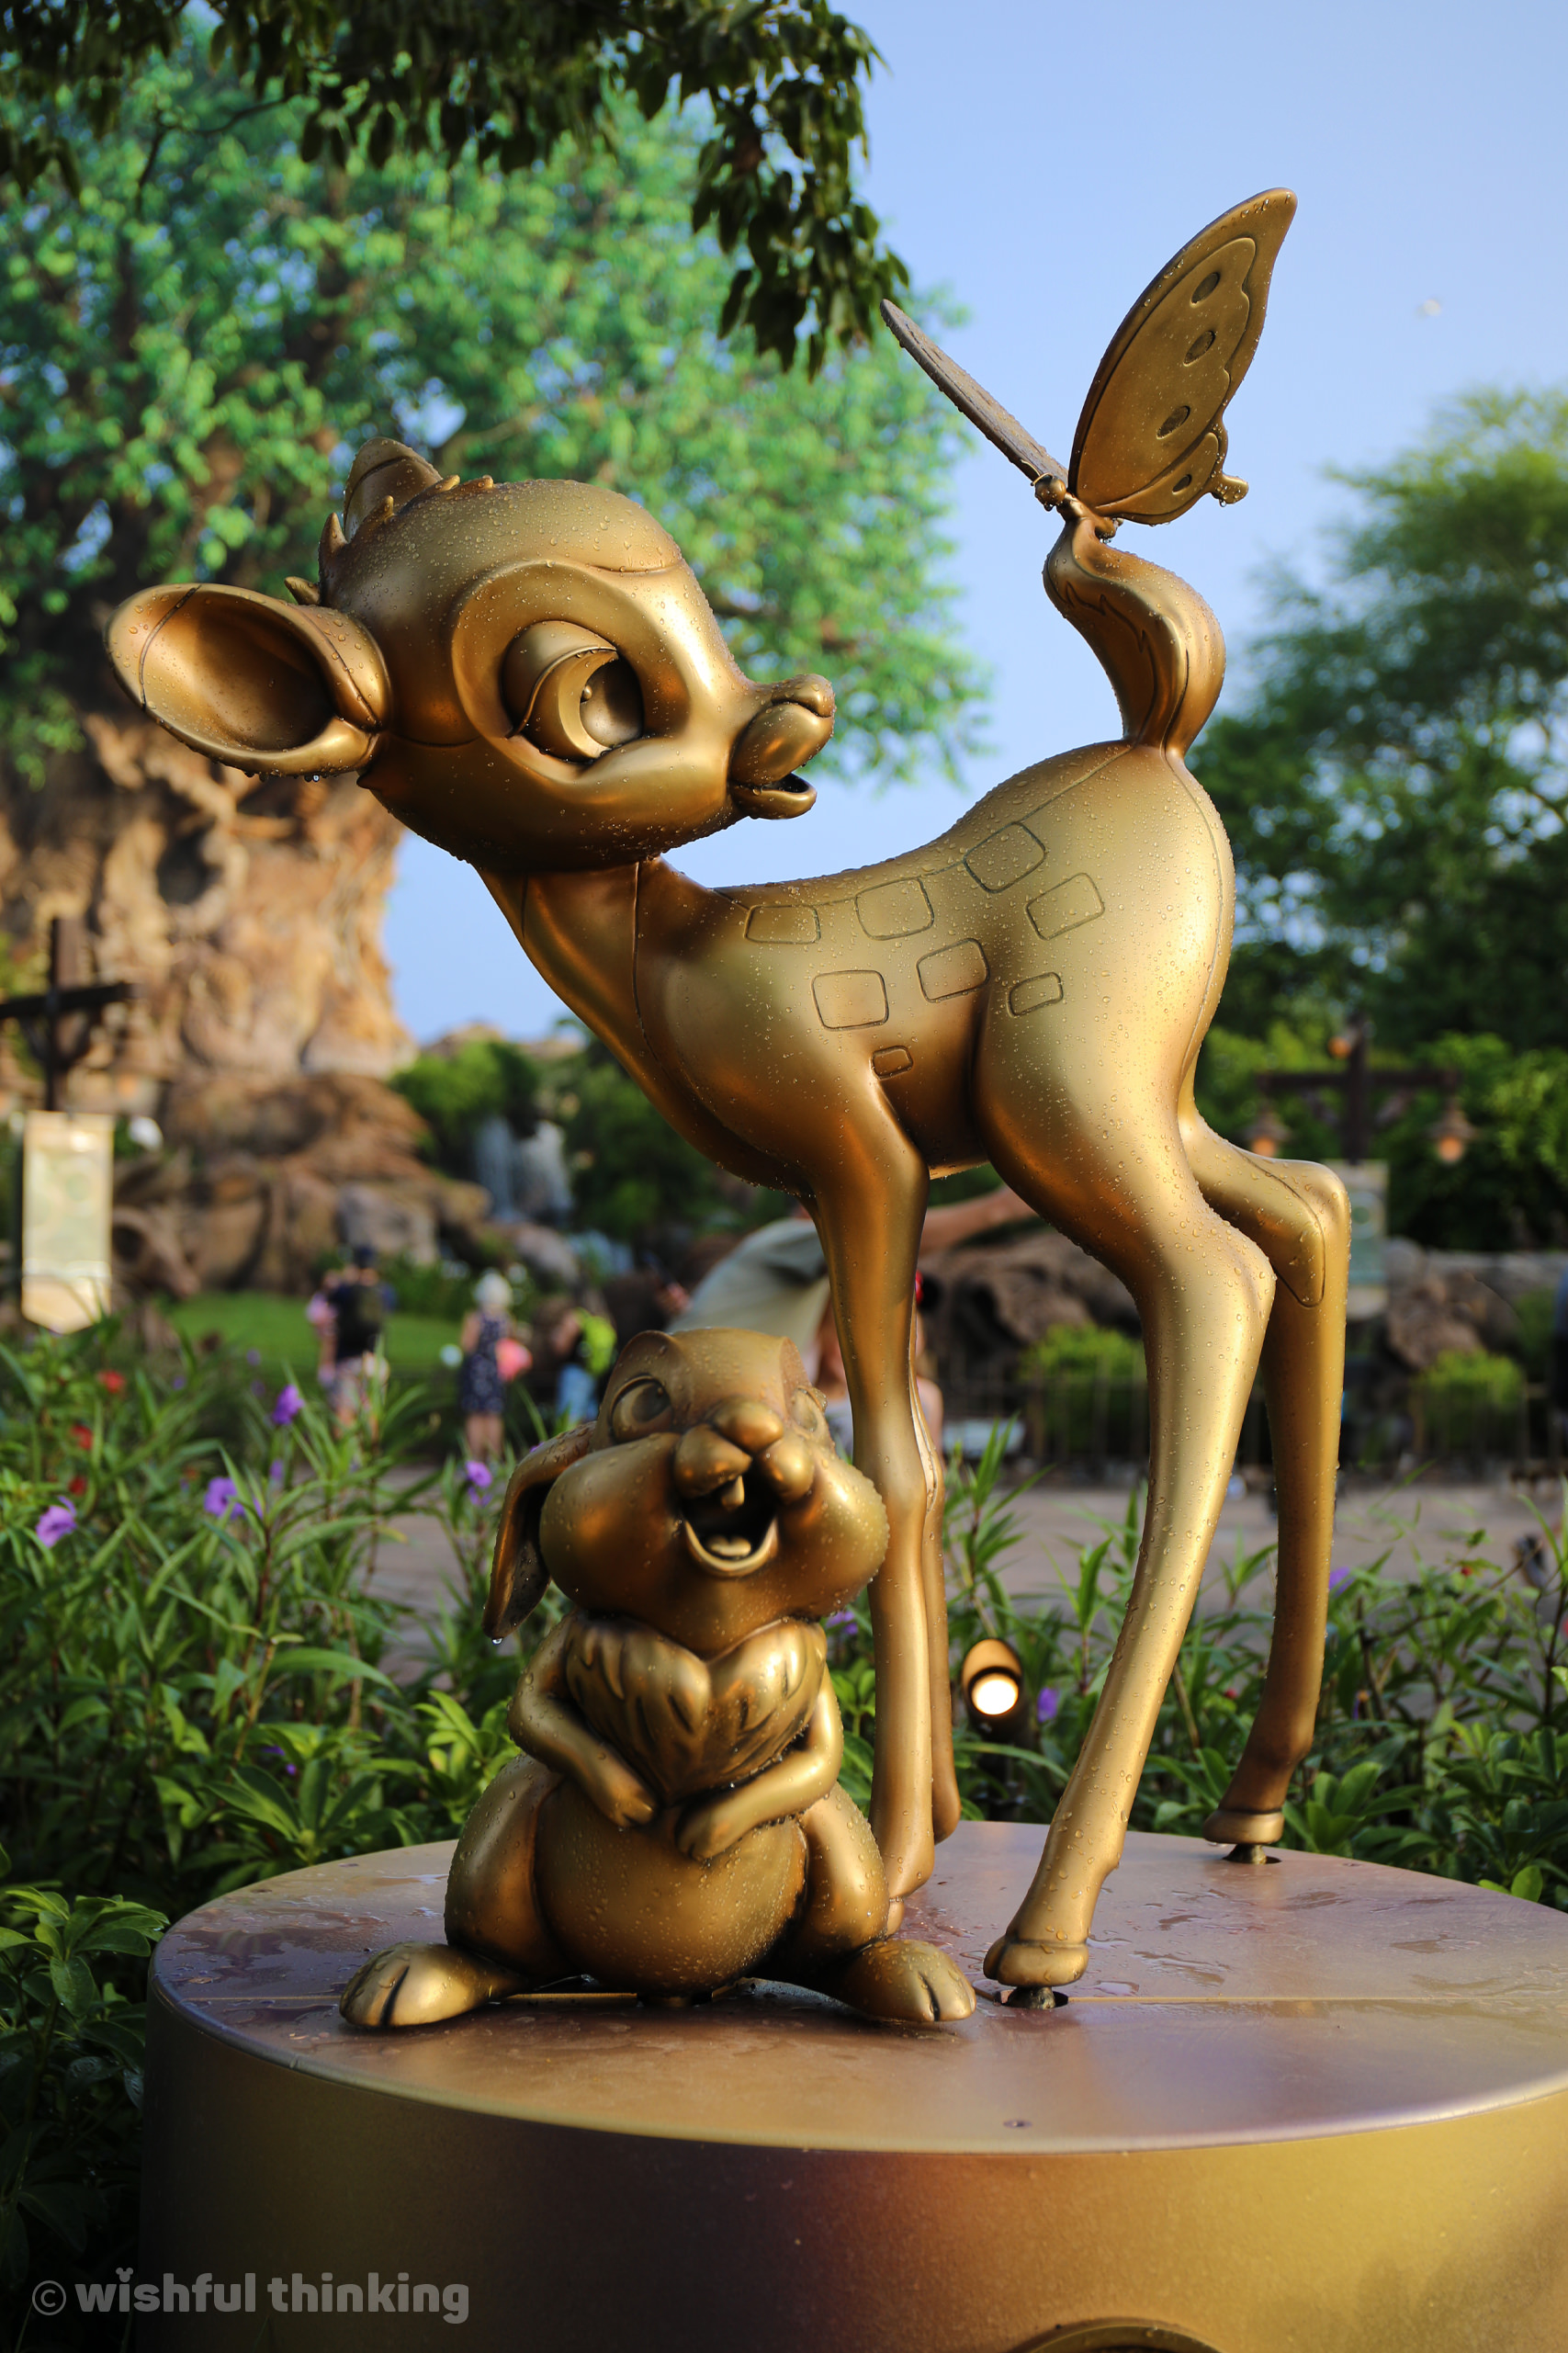 A golden statue of Bambi and Thumper greet guests at Disney's Animal Kingdom for the 50th Anniversary celebration Fab 50